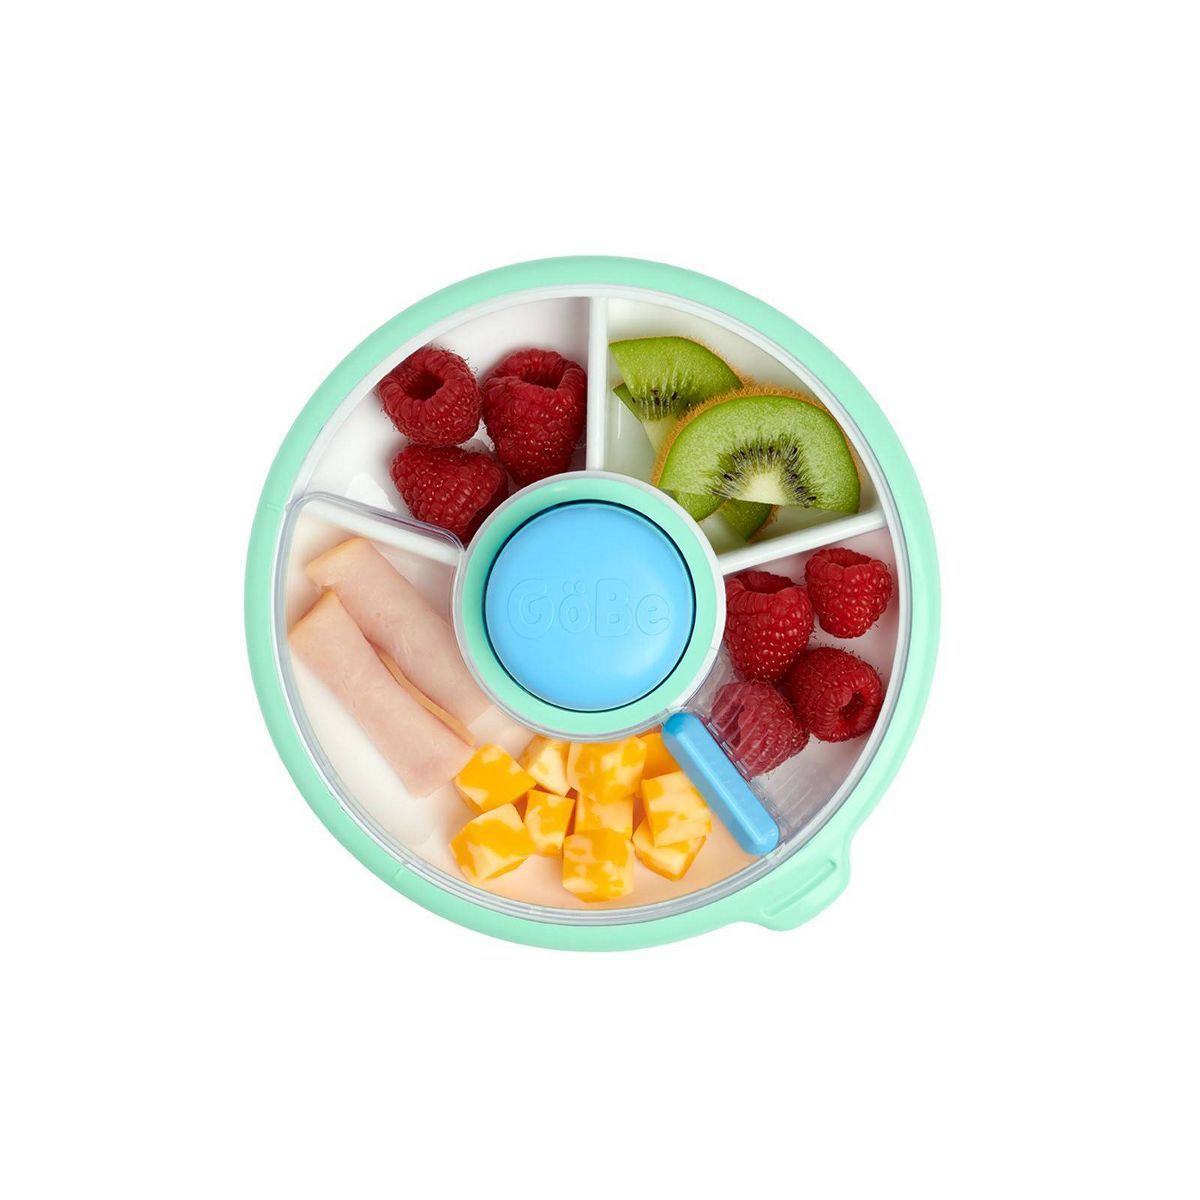 GoBe Kids' 2.0 Snack Spinner Baby and Toddler Food Storage Container - Blue | Target